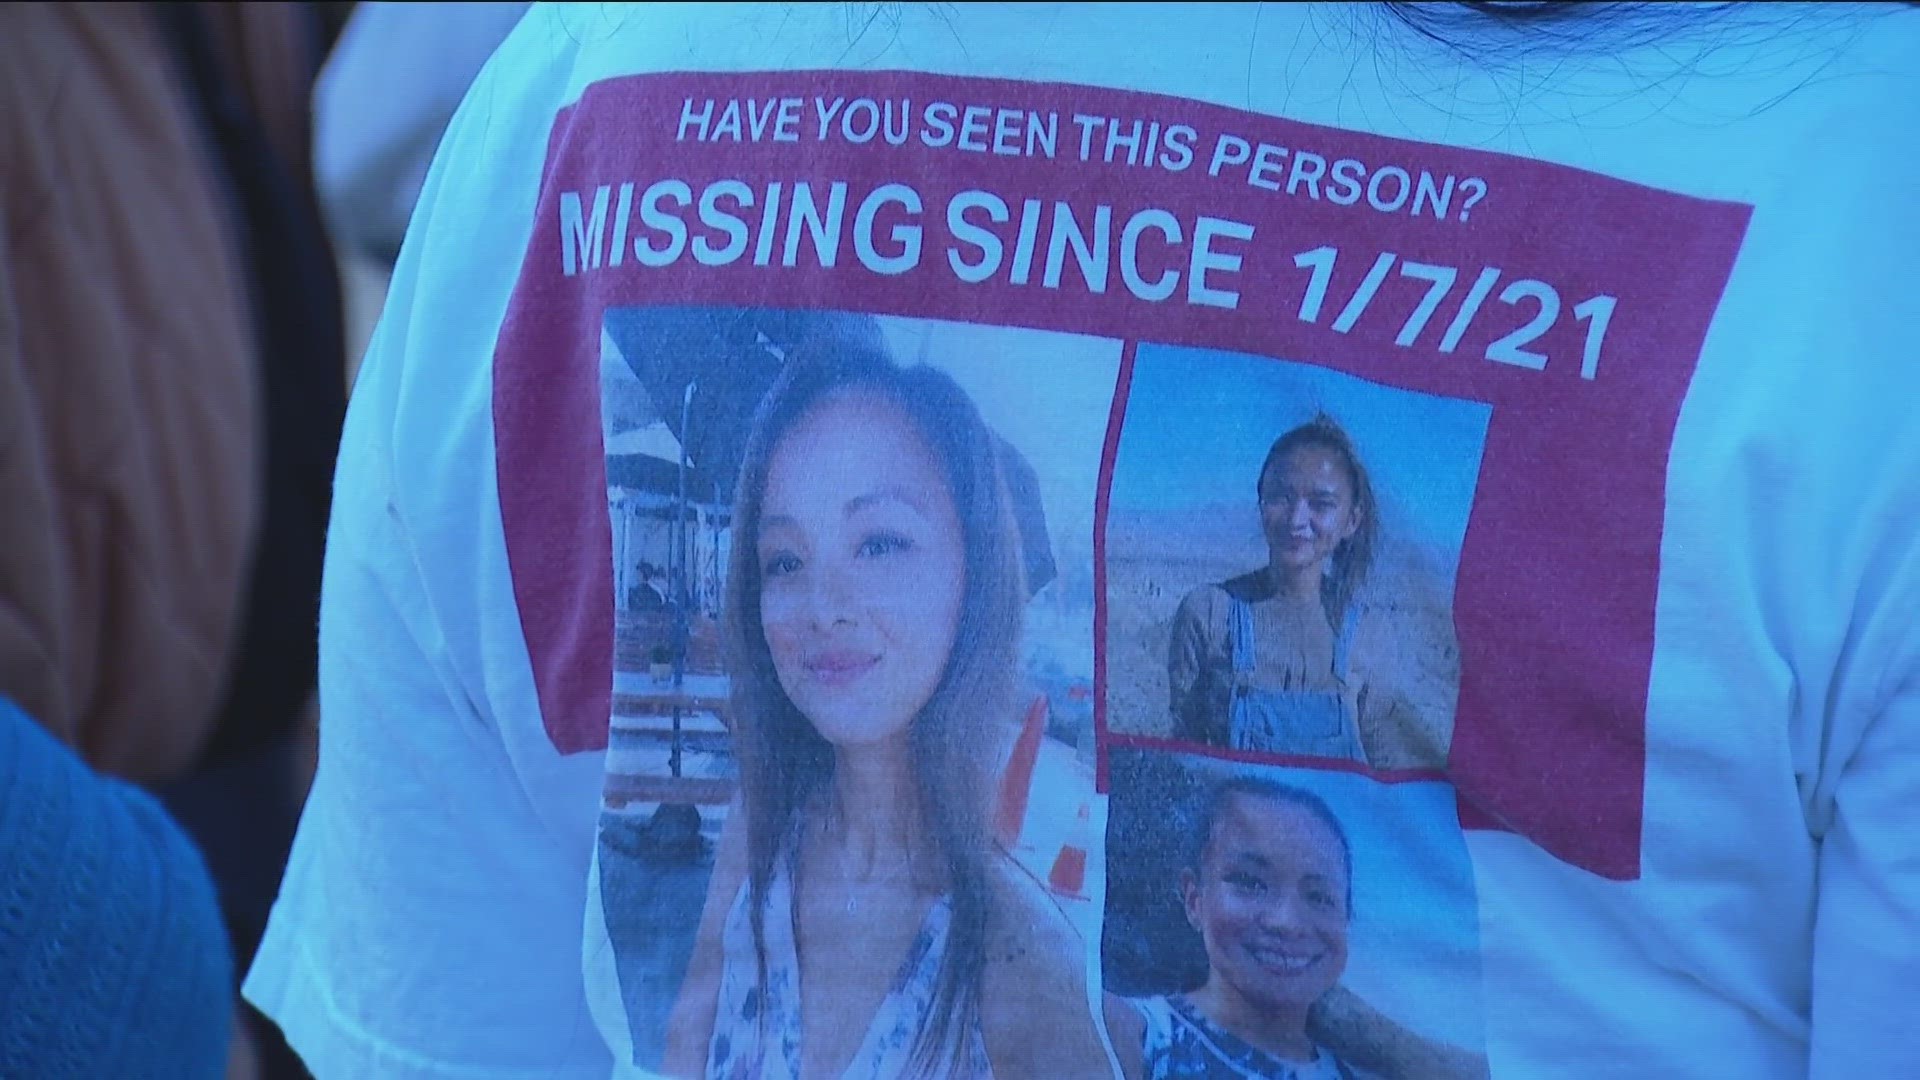 Maya's family and loved ones held a candlelight vigil in her honor at Mount San Miguel Park in Chula Vista, where the search for Maya first began three years ago.